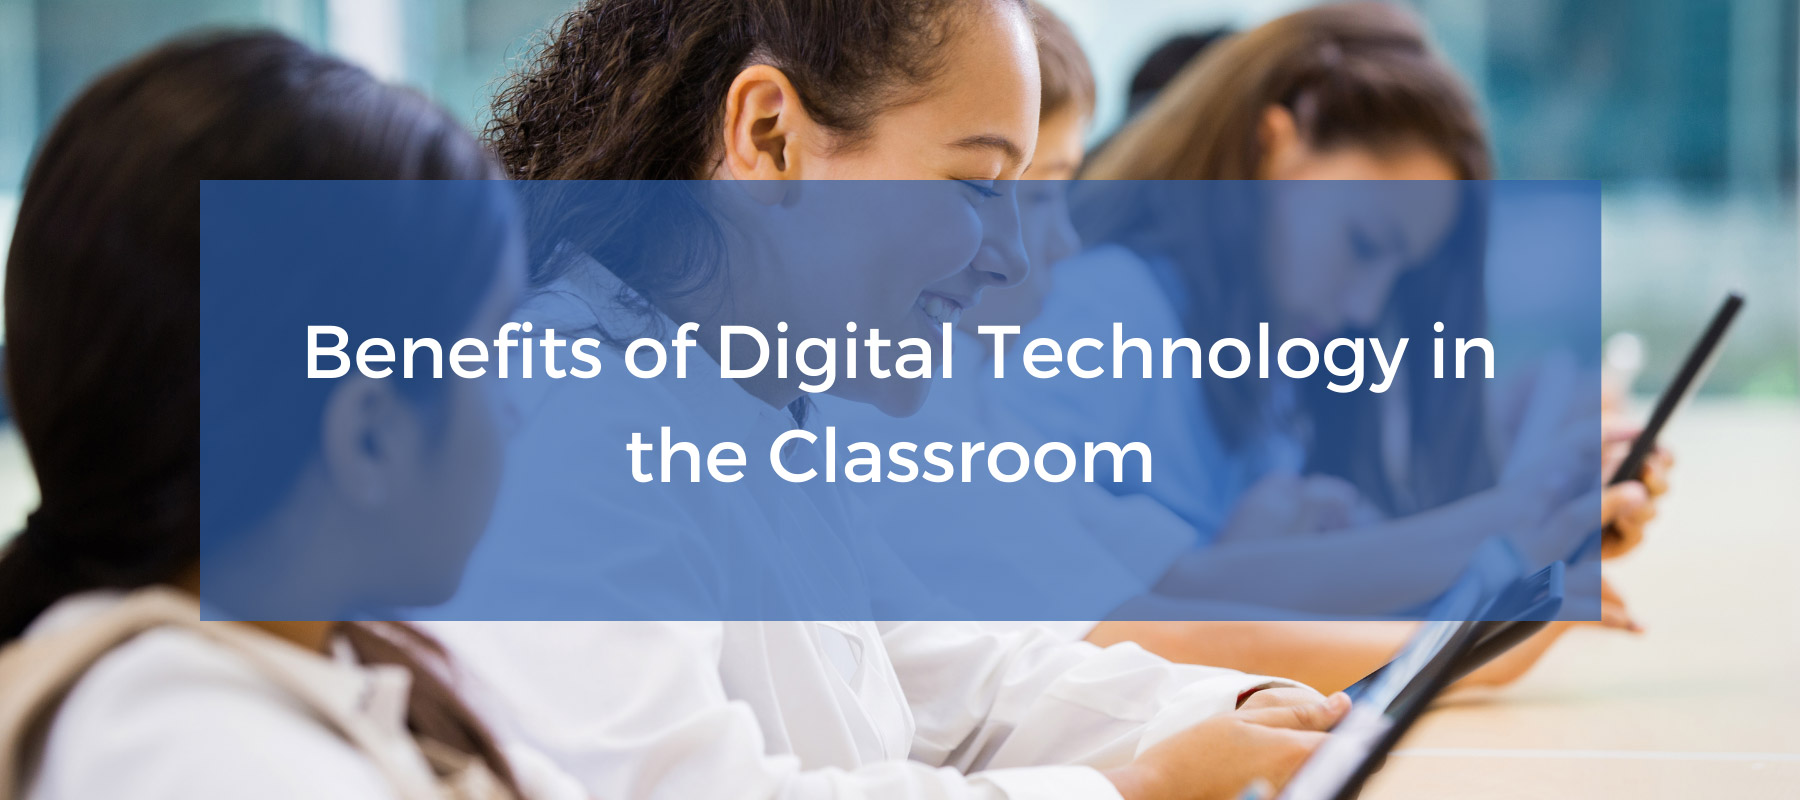 Benefits of Digital Technology in the Classroom